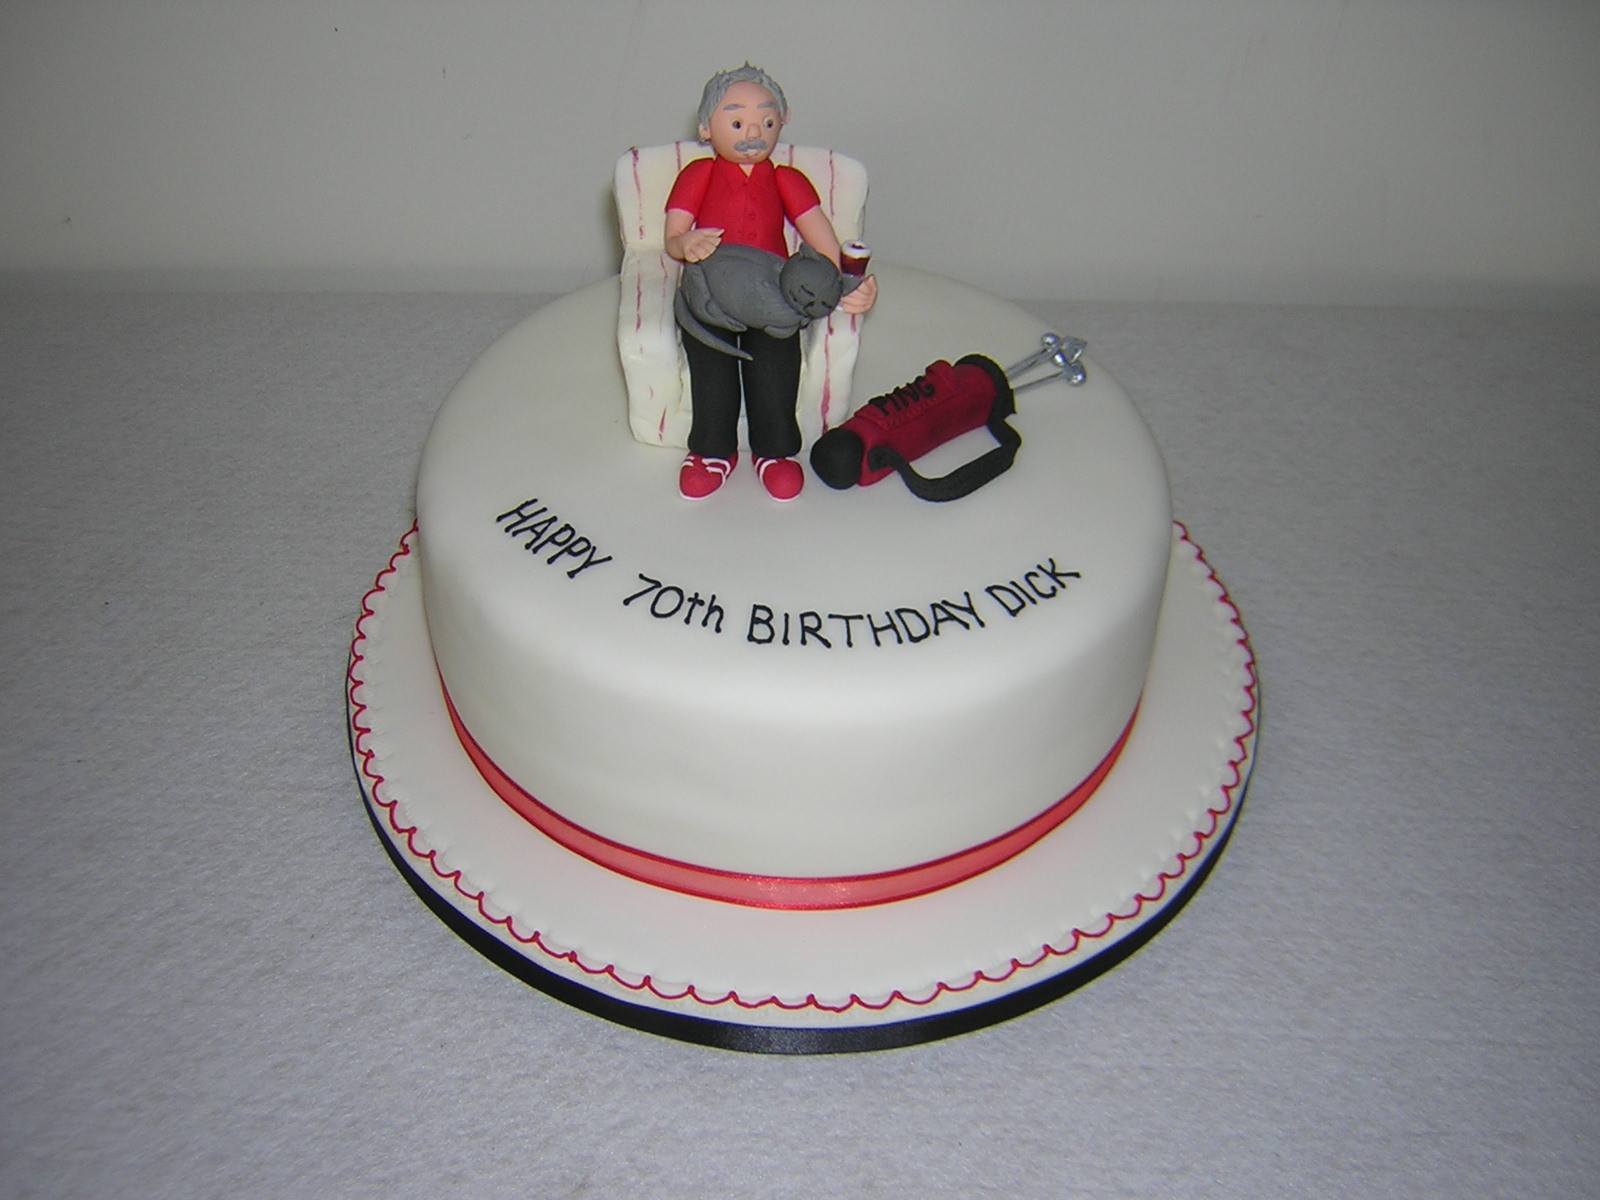 Pictures Of Birthday Cakes For Men
 Index of wp content gallery birthday cakes men